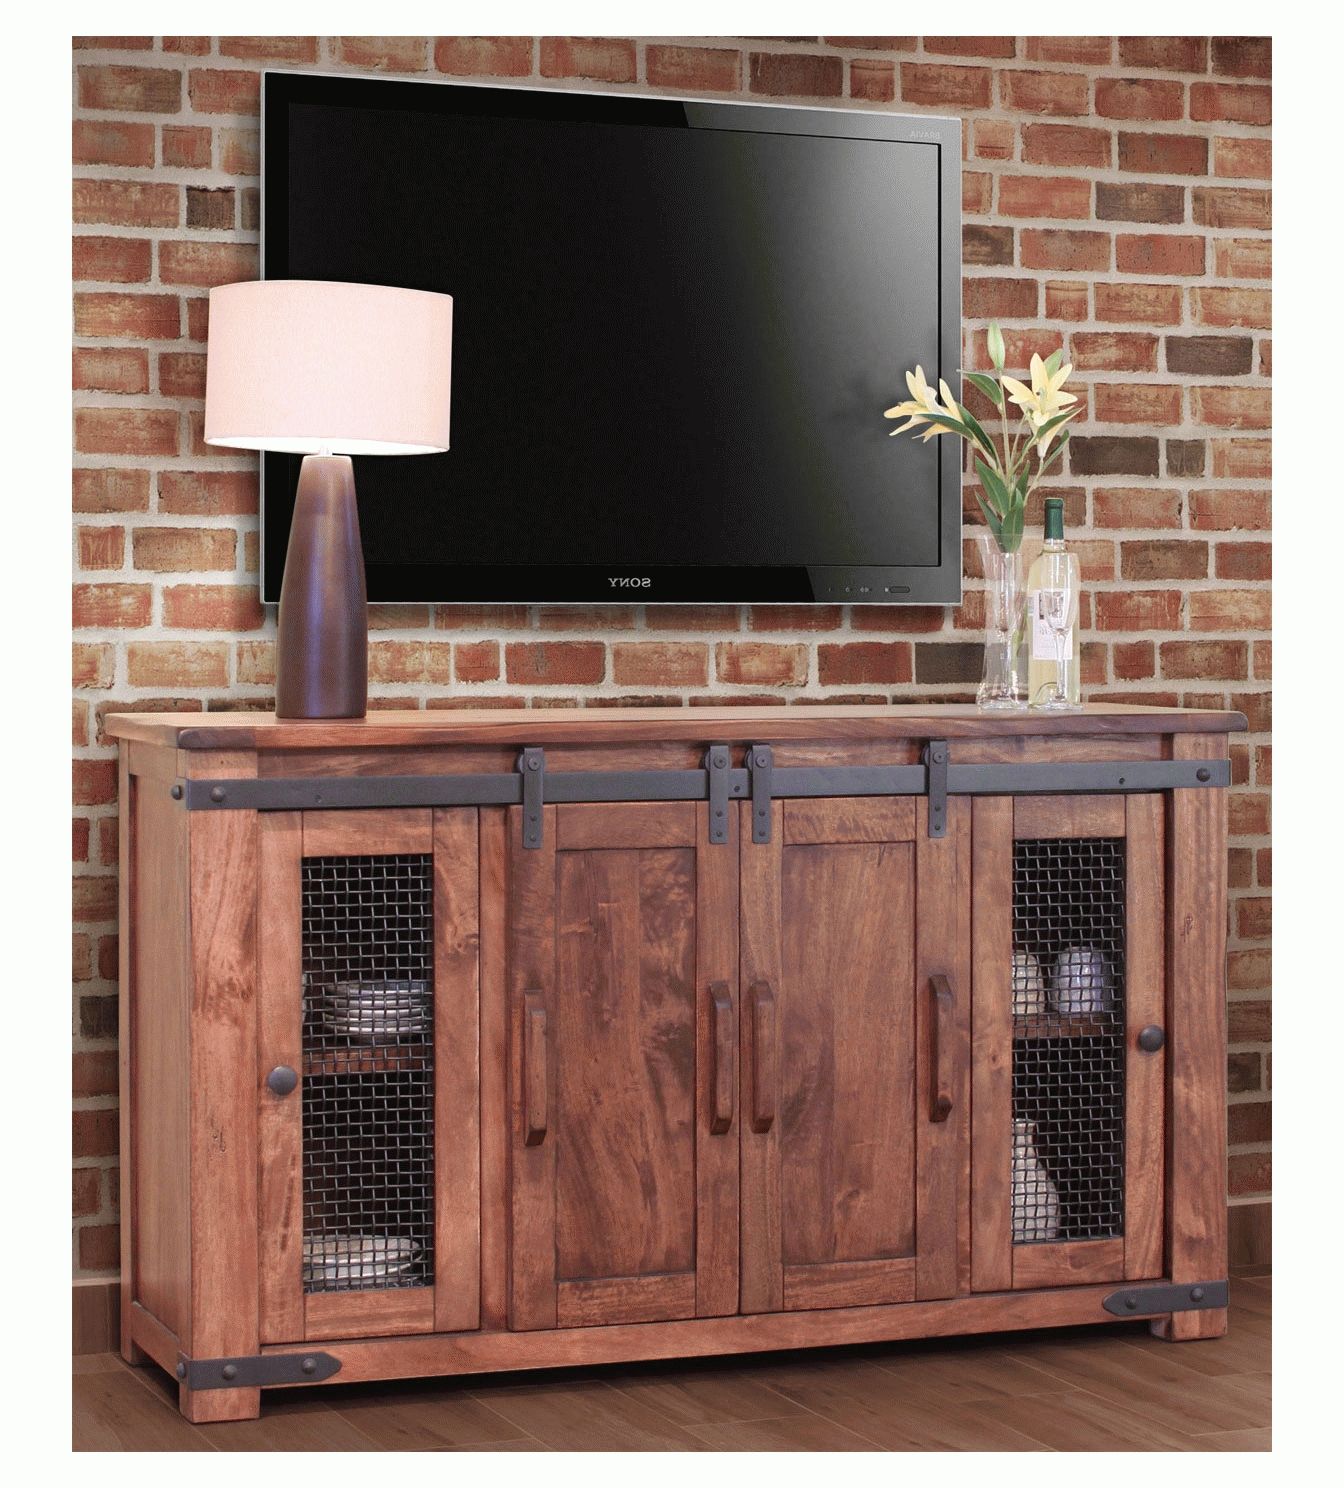 Rustic Barn Door Tv Stand, Barn Door Tv Stand, Barn Door Tv Console Pertaining To Tv Stands And Cabinets (View 5 of 15)